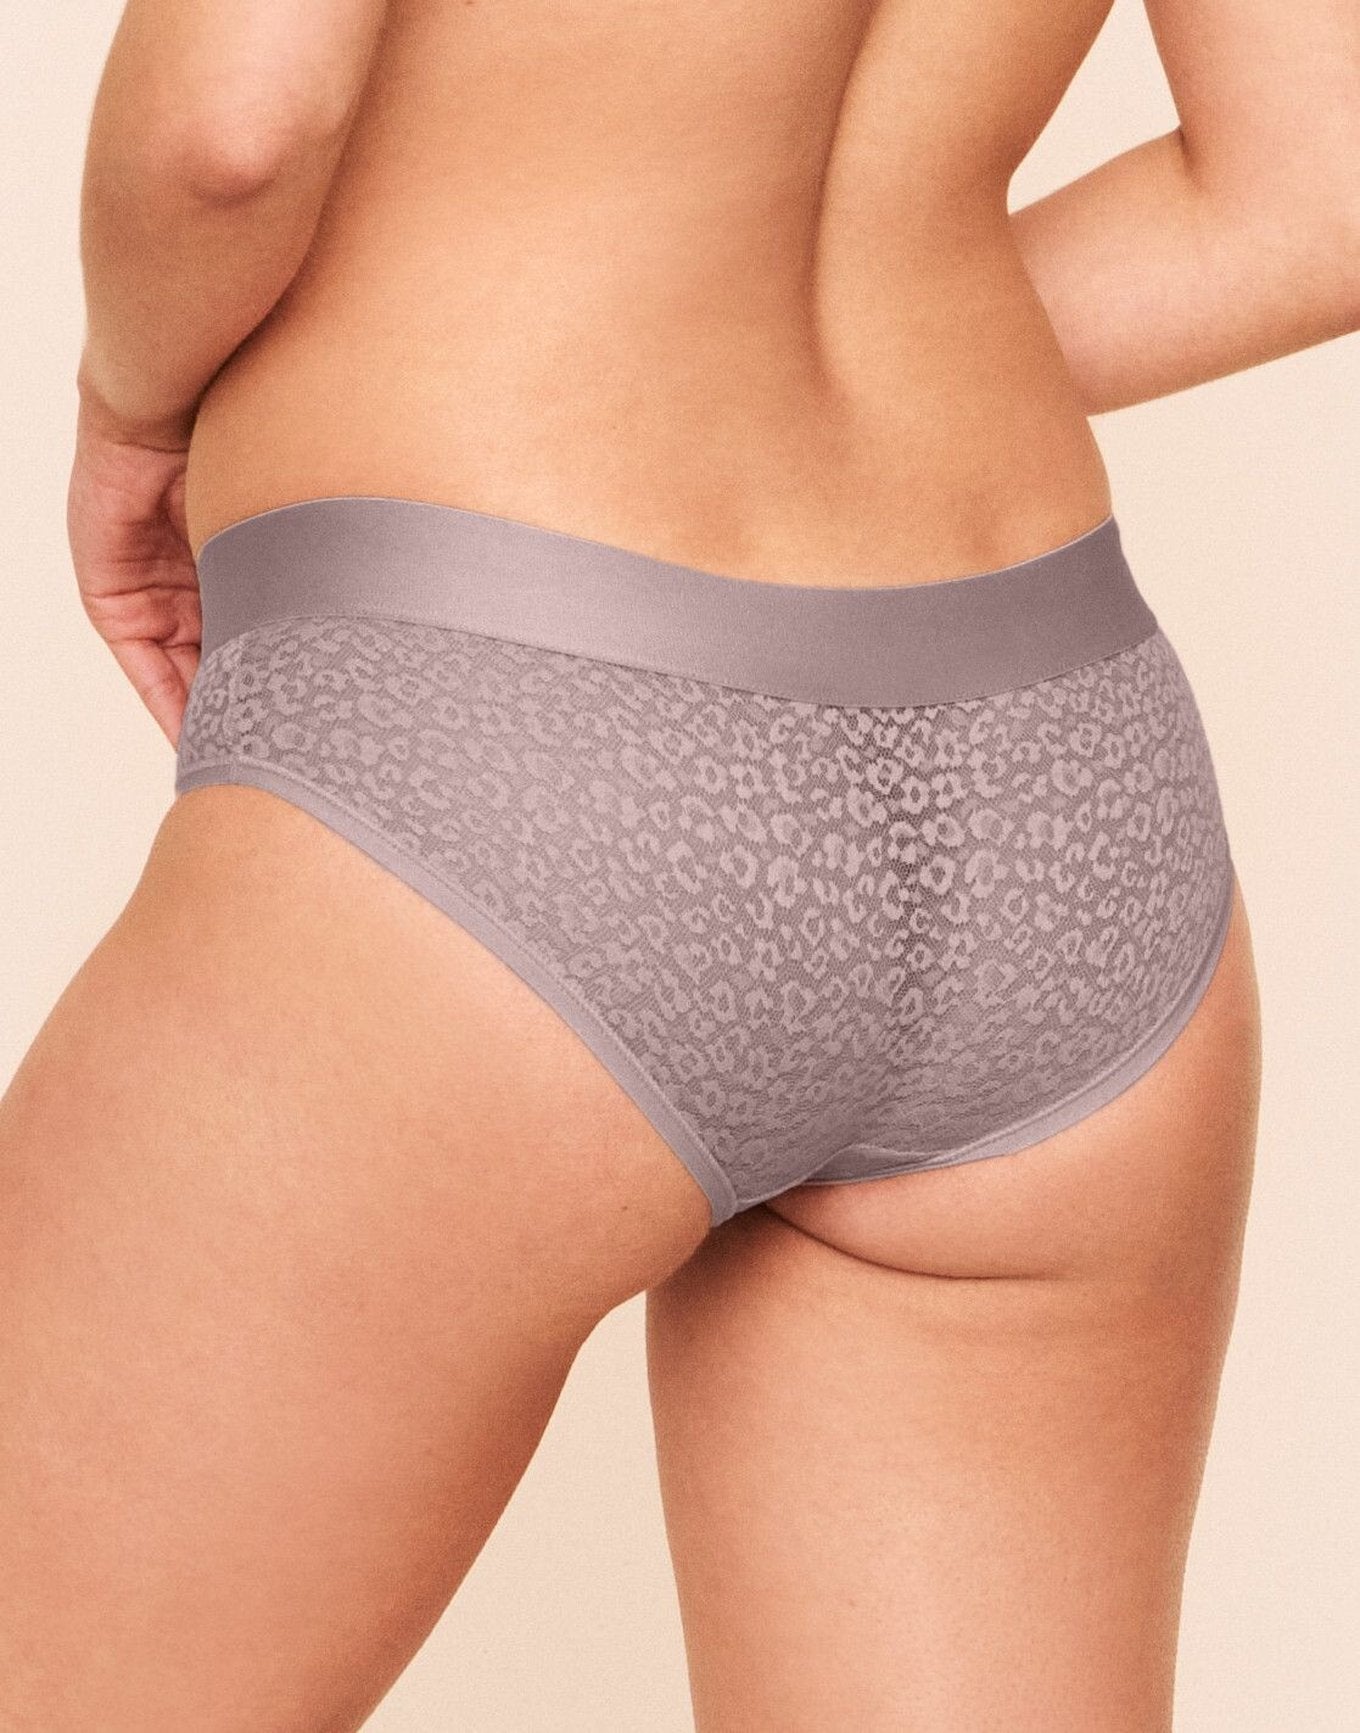 Earth Republic James Lace Lace Hipster in color Deauville Mauve and shape hipster